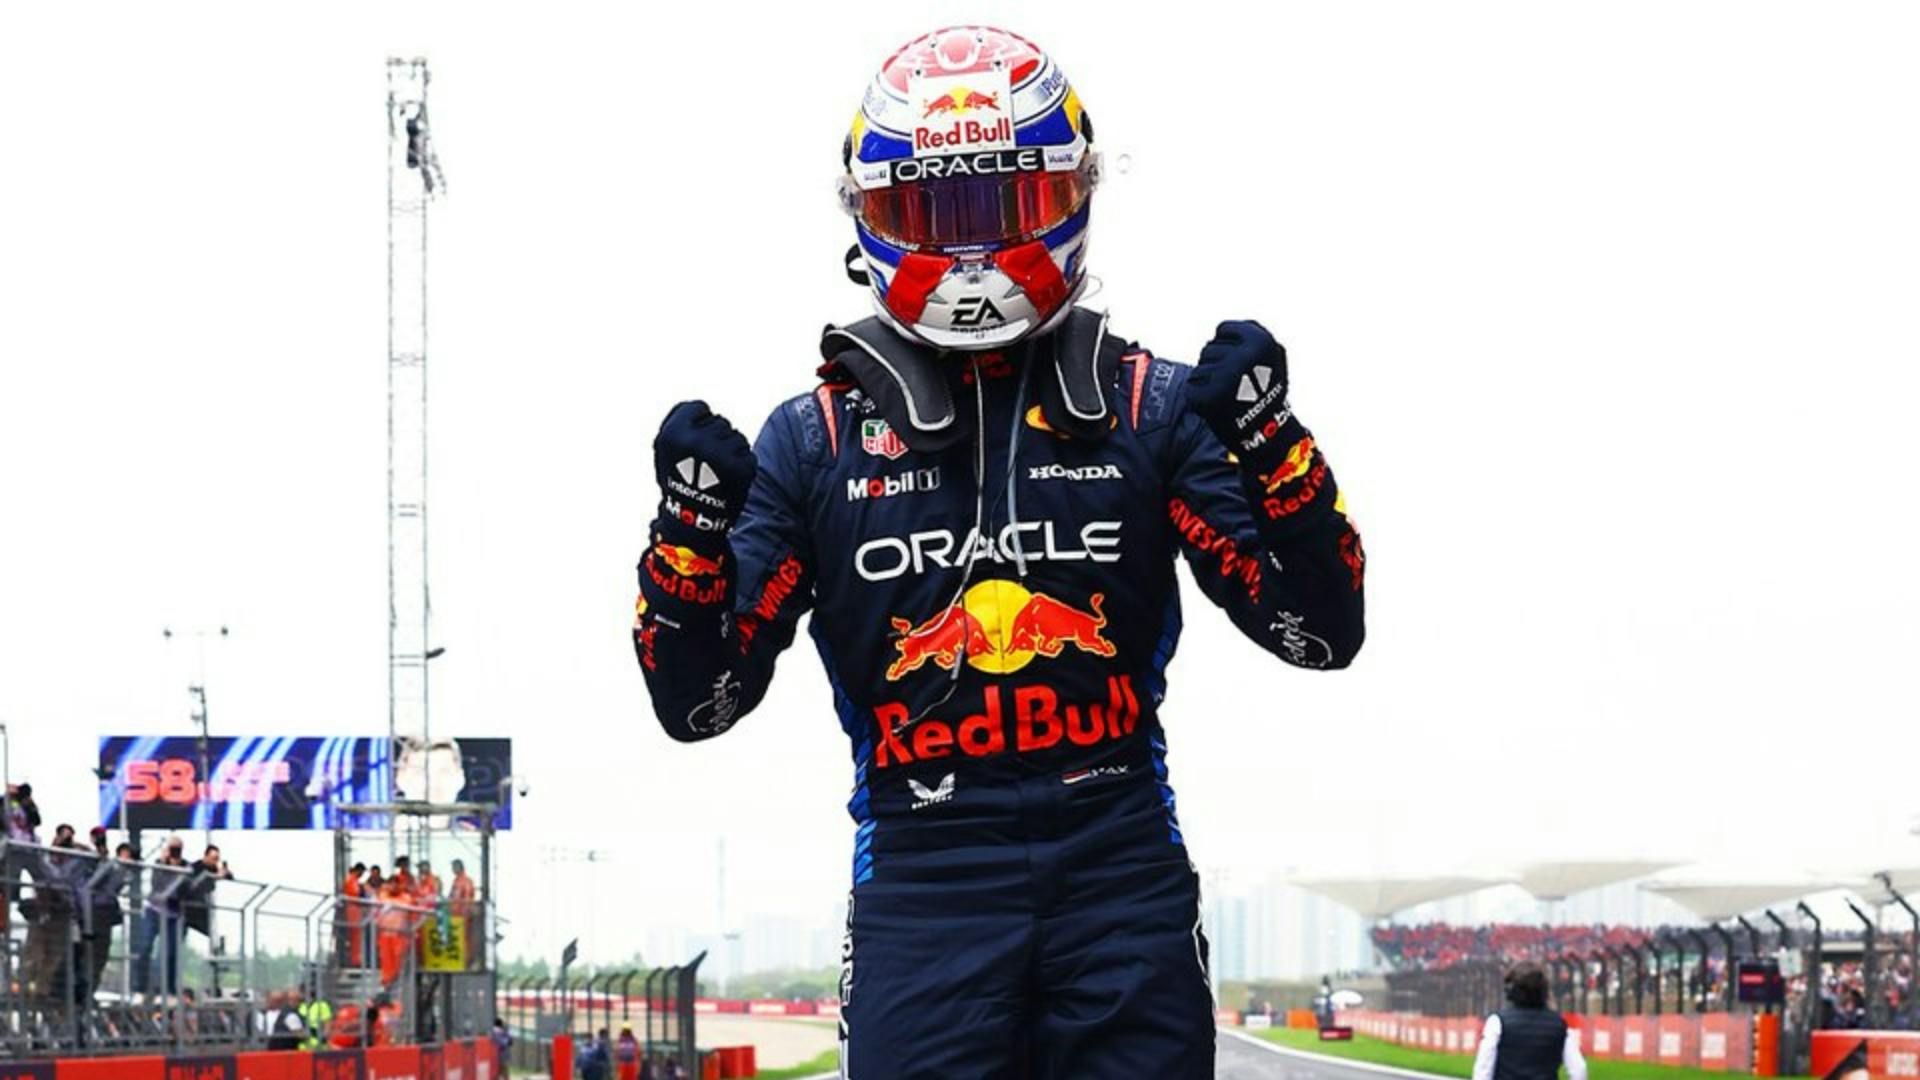 Red Bull star Max Verstappen gets double wins in Formula 1